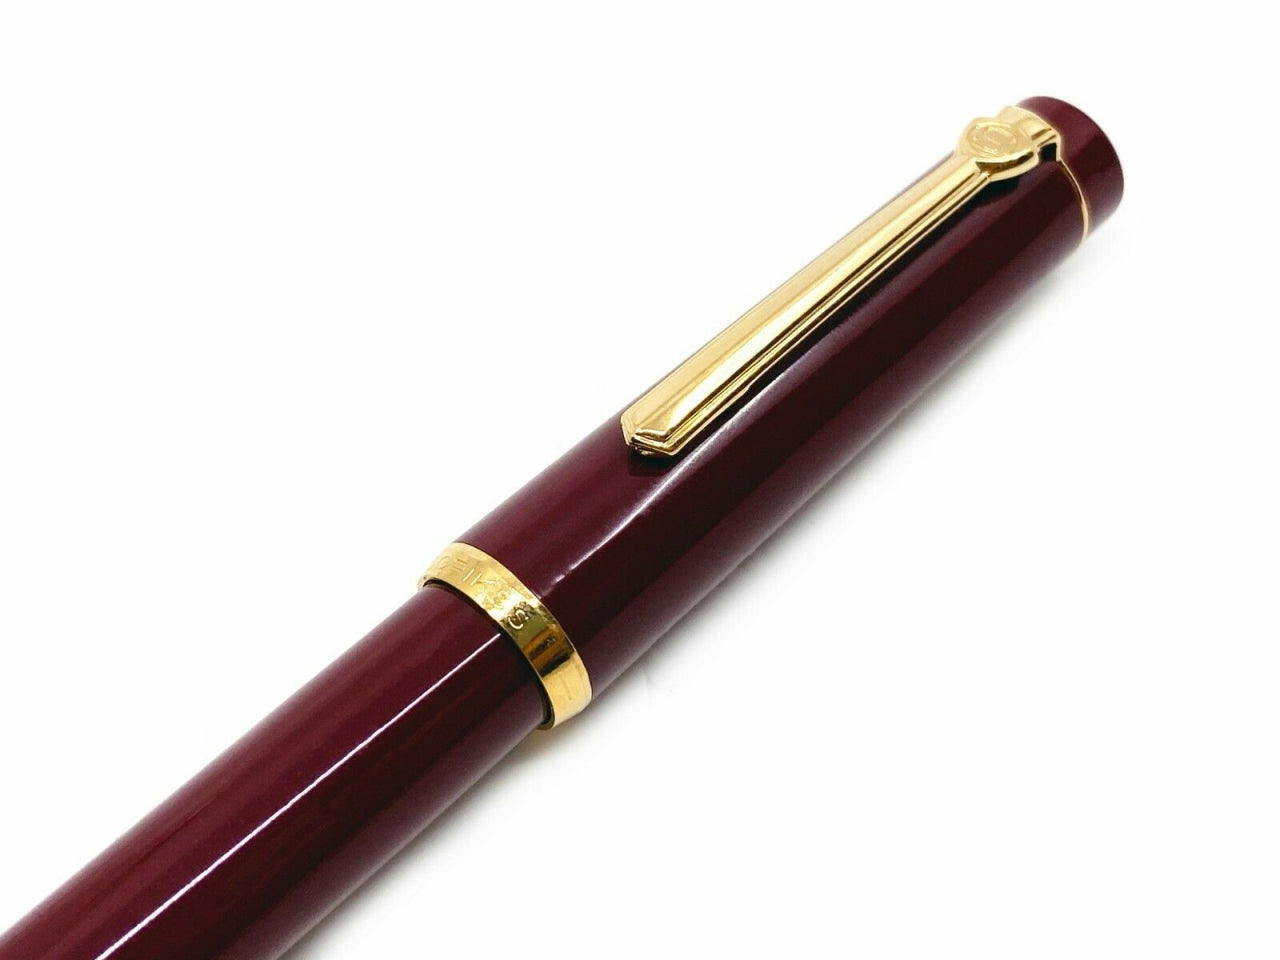 Scrikss Legendary 419 Classic Fountain Pen with Piston Ink Filling System, Gold Plated Iridium Nib, Gold Plated - Ring, Clip, Nozzle And Scratch Resistant Acrylic Burgundy Barrel